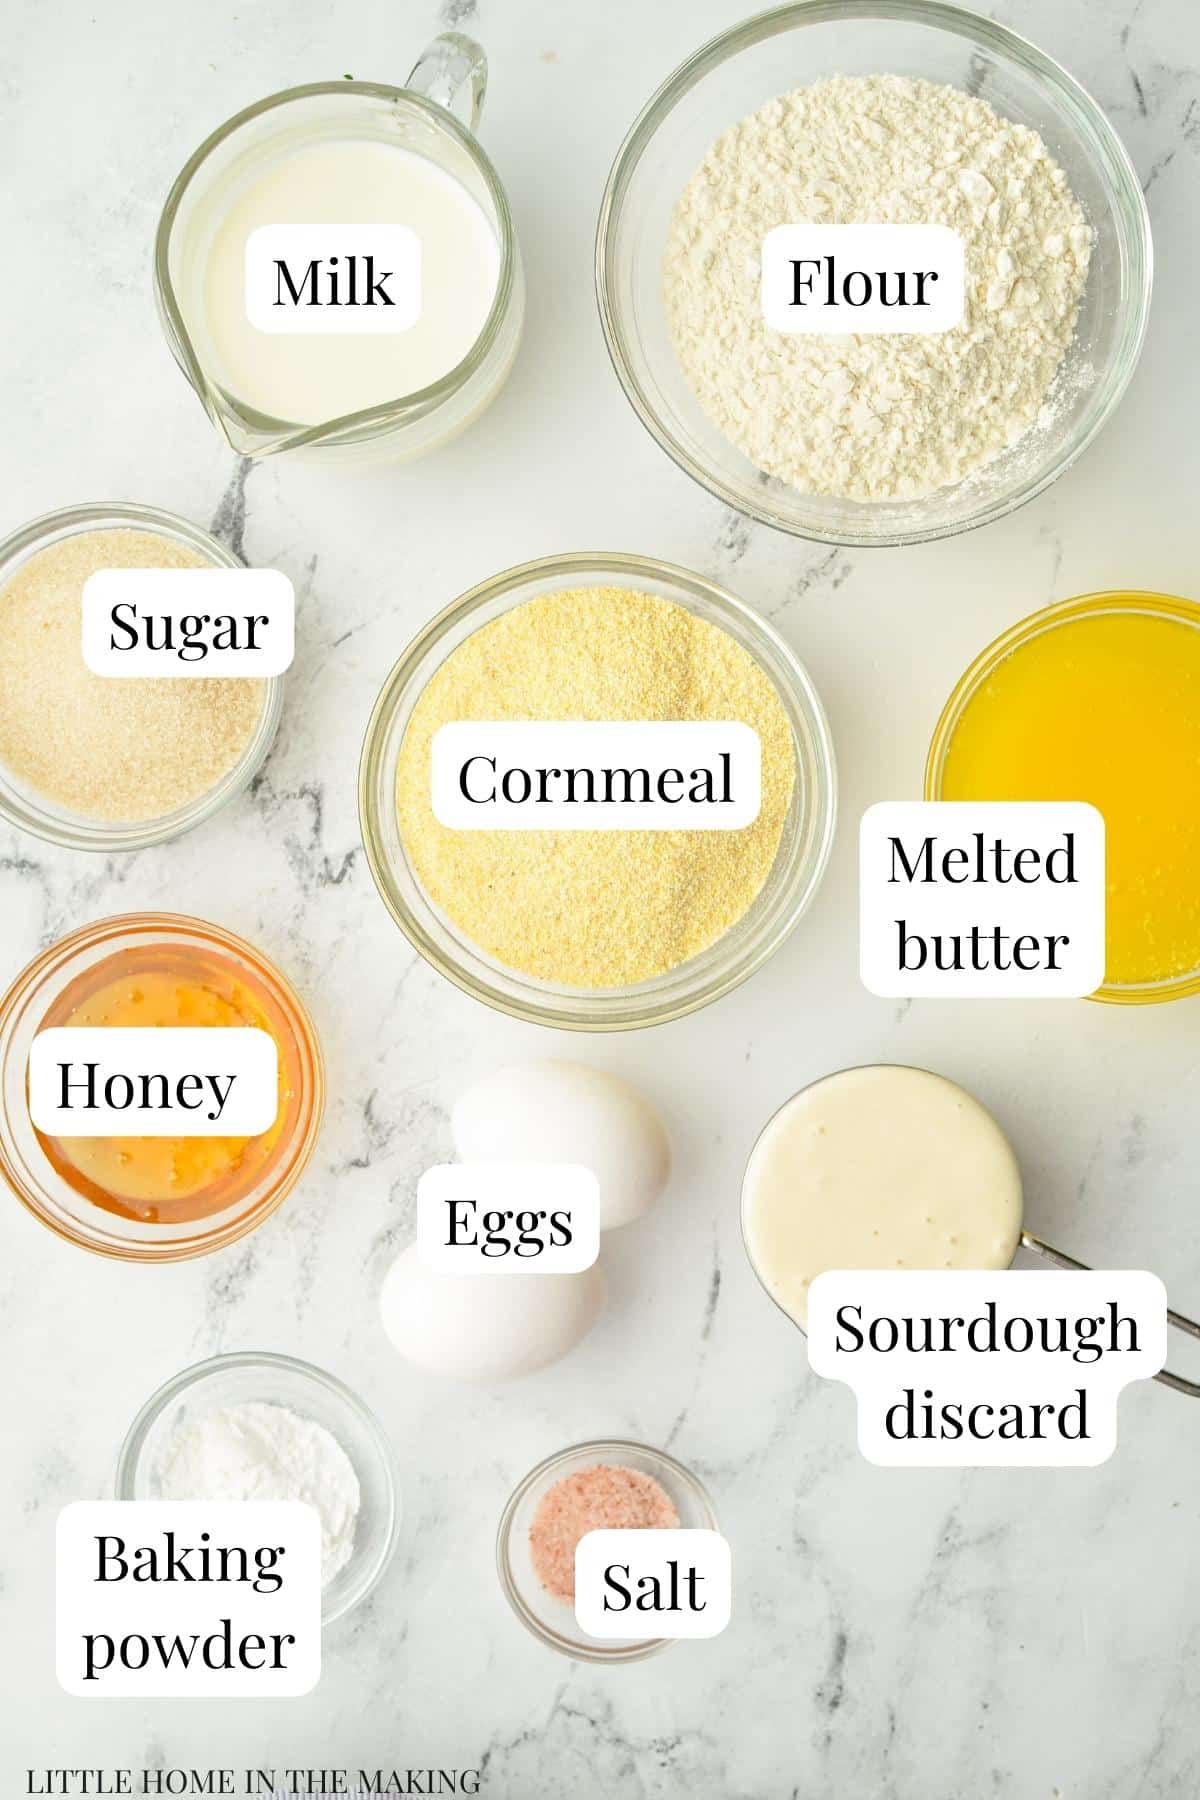 The ingredients needed to make corn muffins: cornmeal, flour, butter, honey, etc.